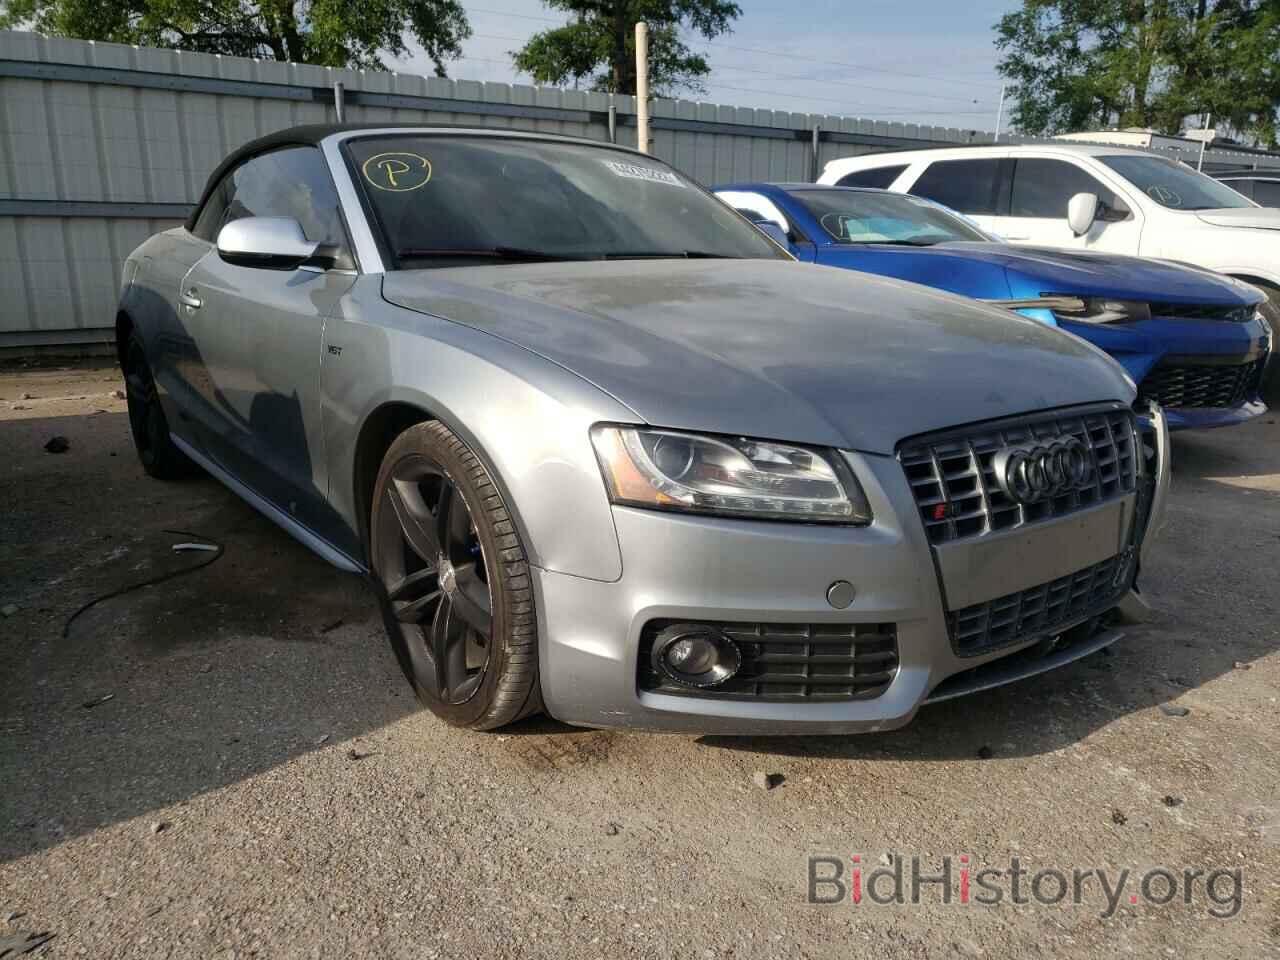 Photo WAUVGAFH3AN019762 - AUDI S5/RS5 2010